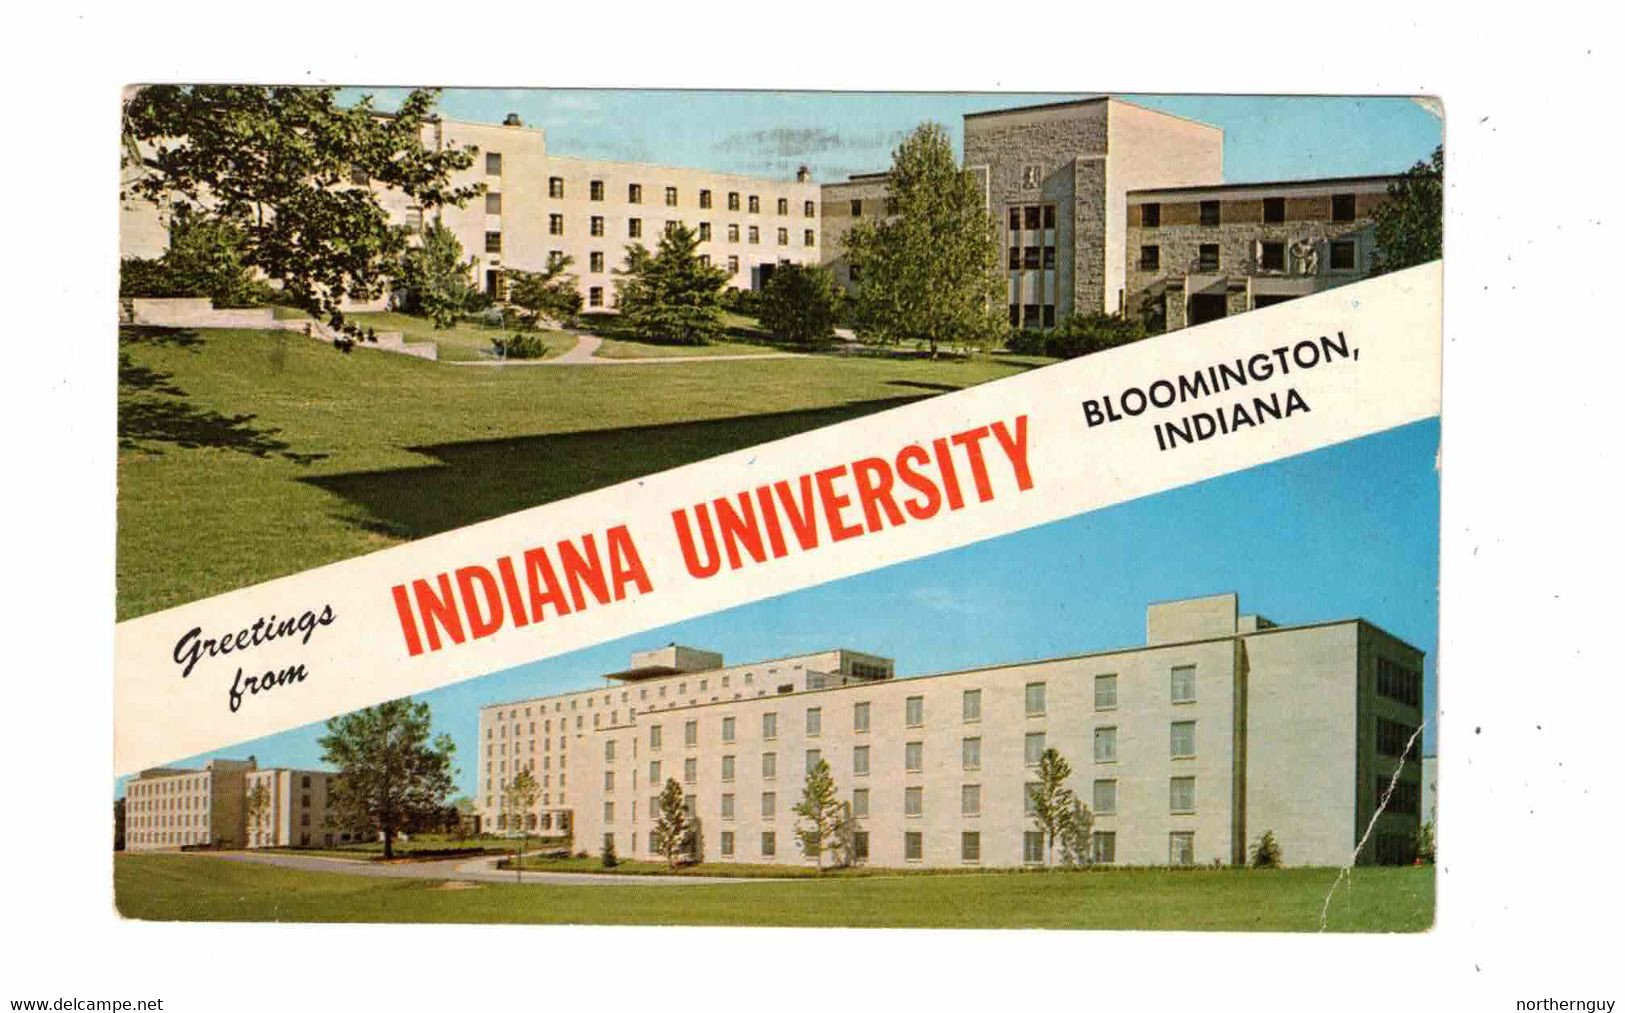 BLOOMINGTON, Indiana, USA, Greetings From, Indiana University, Multi-View Described On Back, 1963 Chrome Postcard - Bloomington